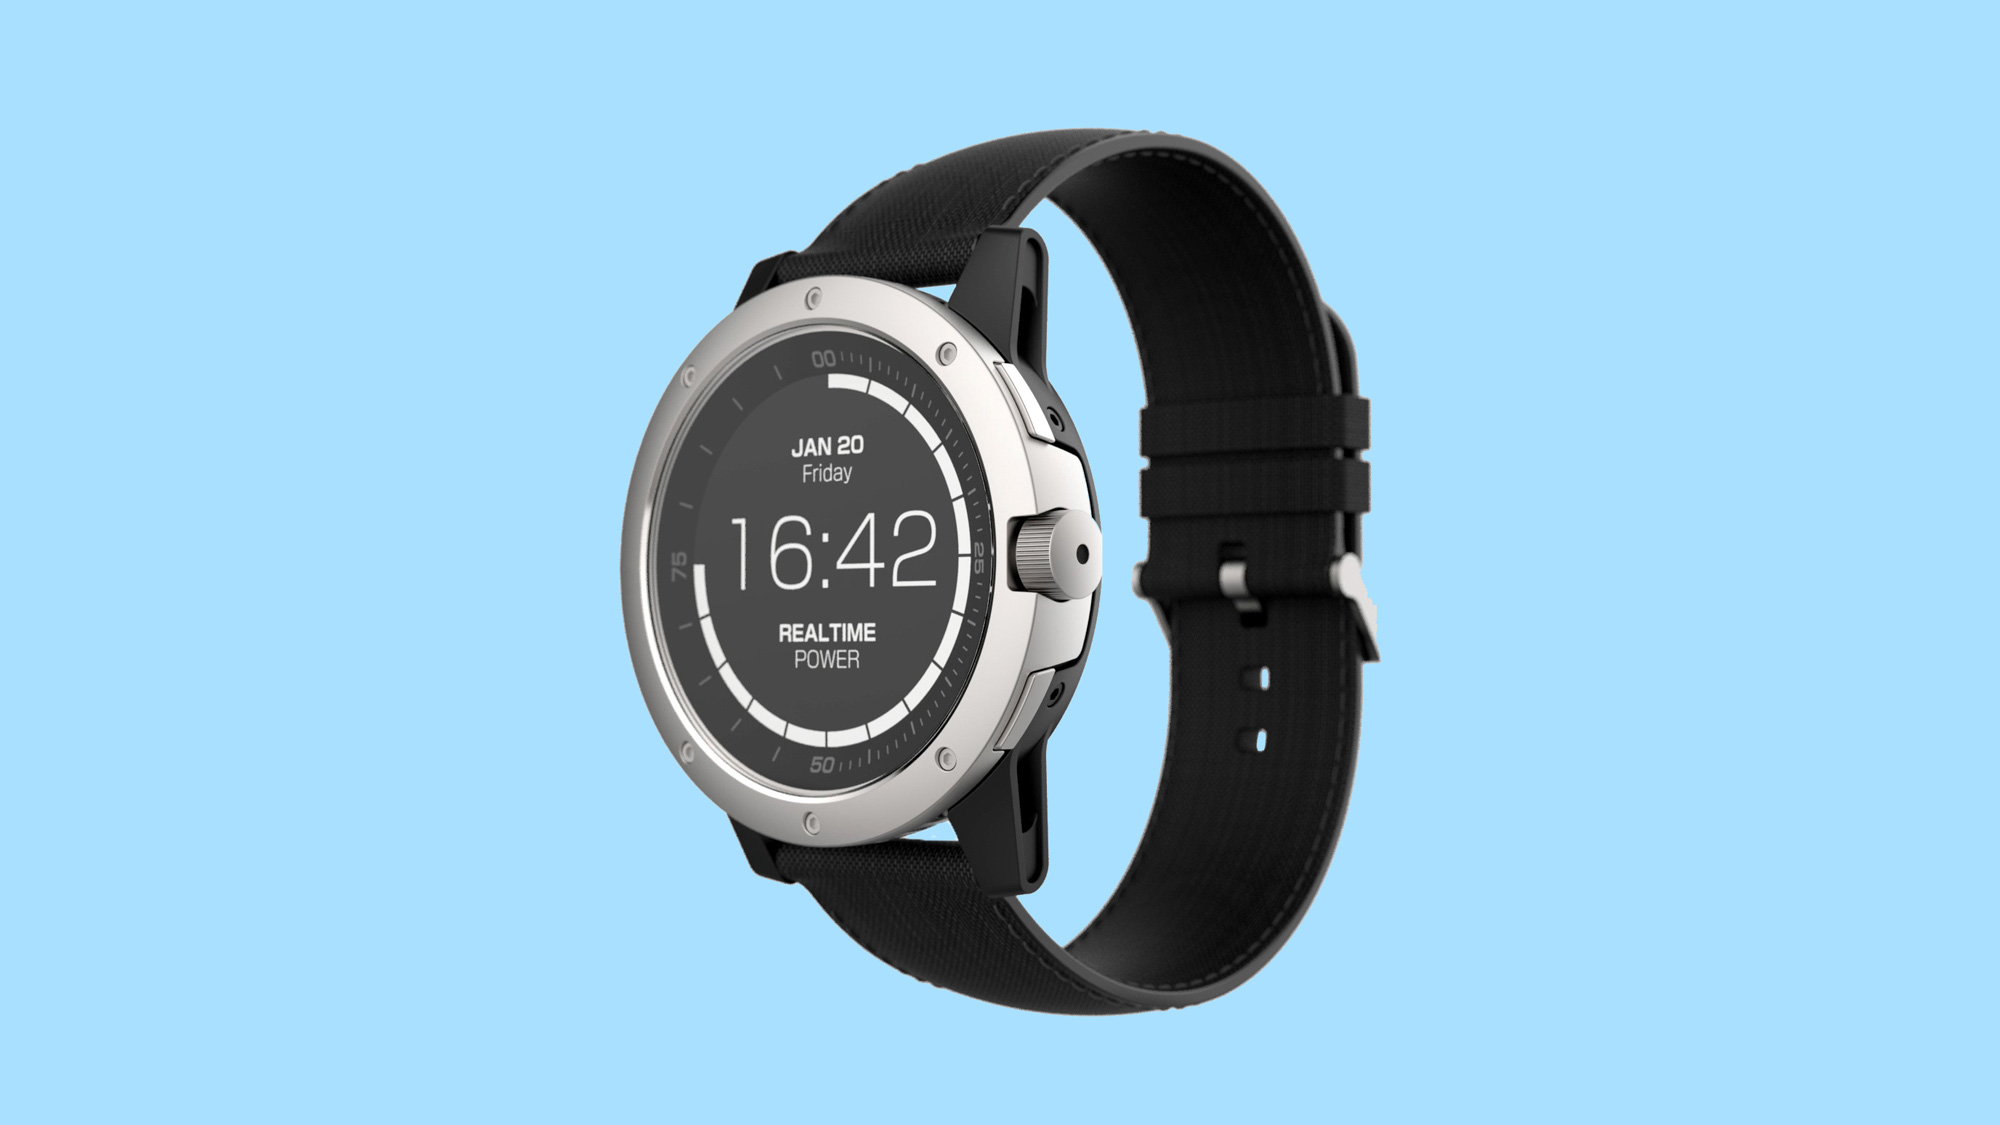 Body Heat Powers This Smart Watch | MIT Technology Review